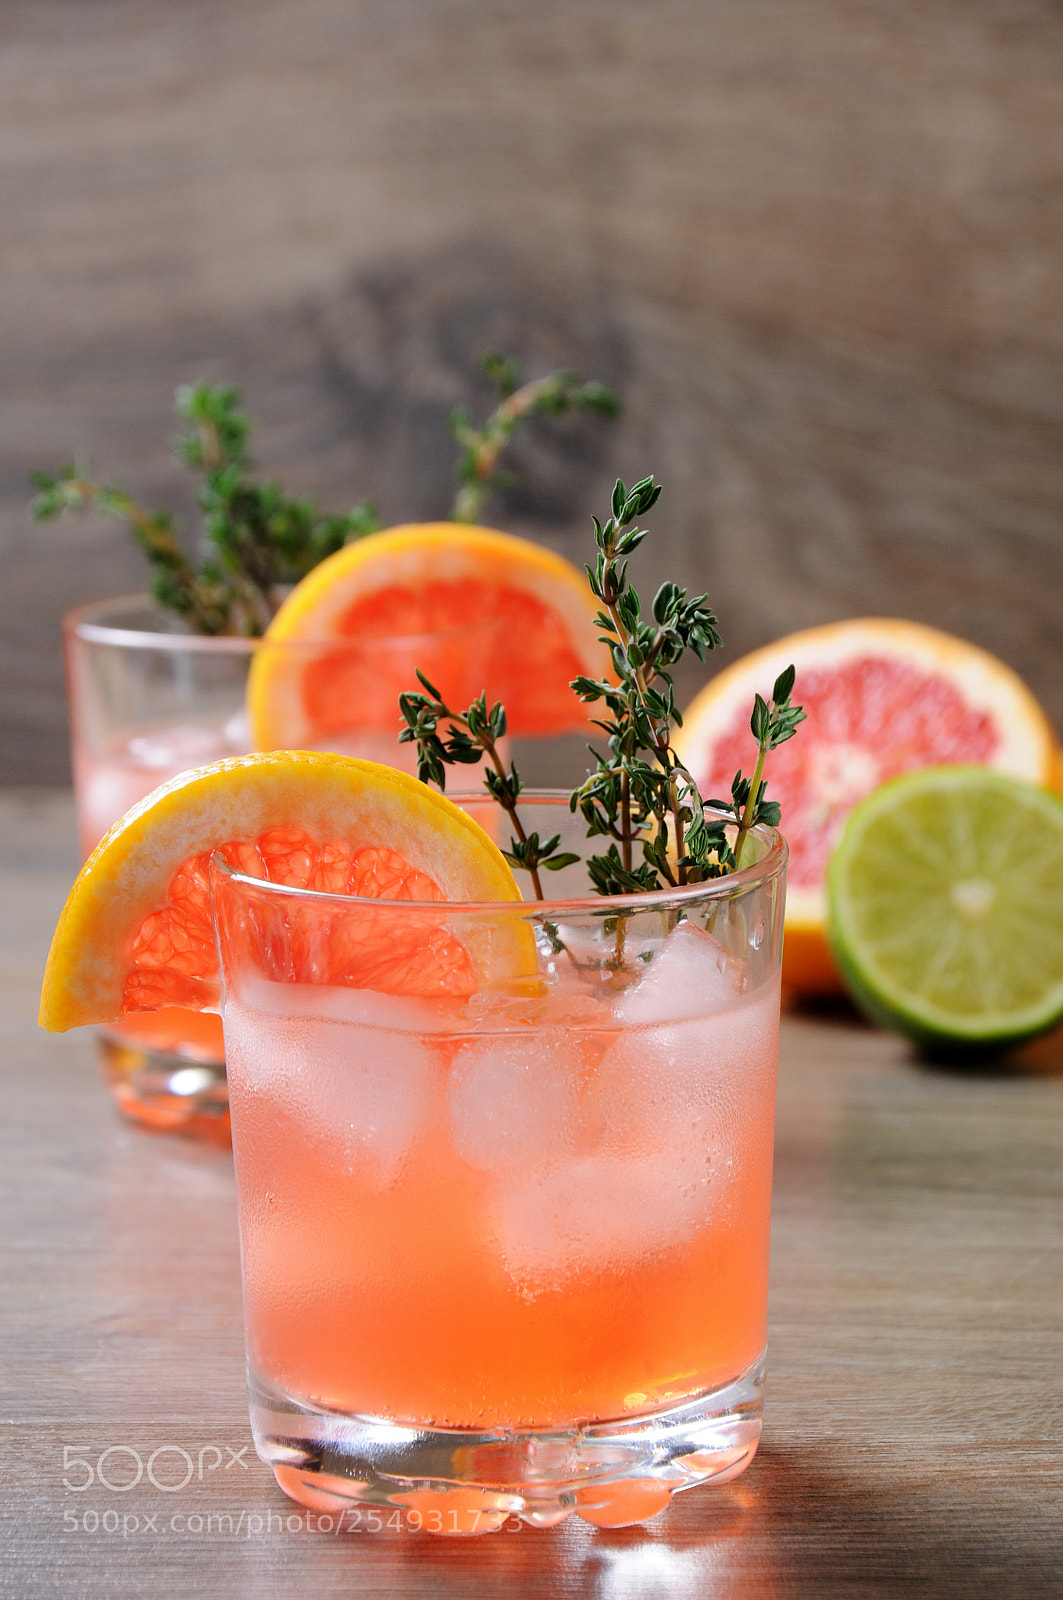 Nikon D90 sample photo. This grapefruit and thyme photography